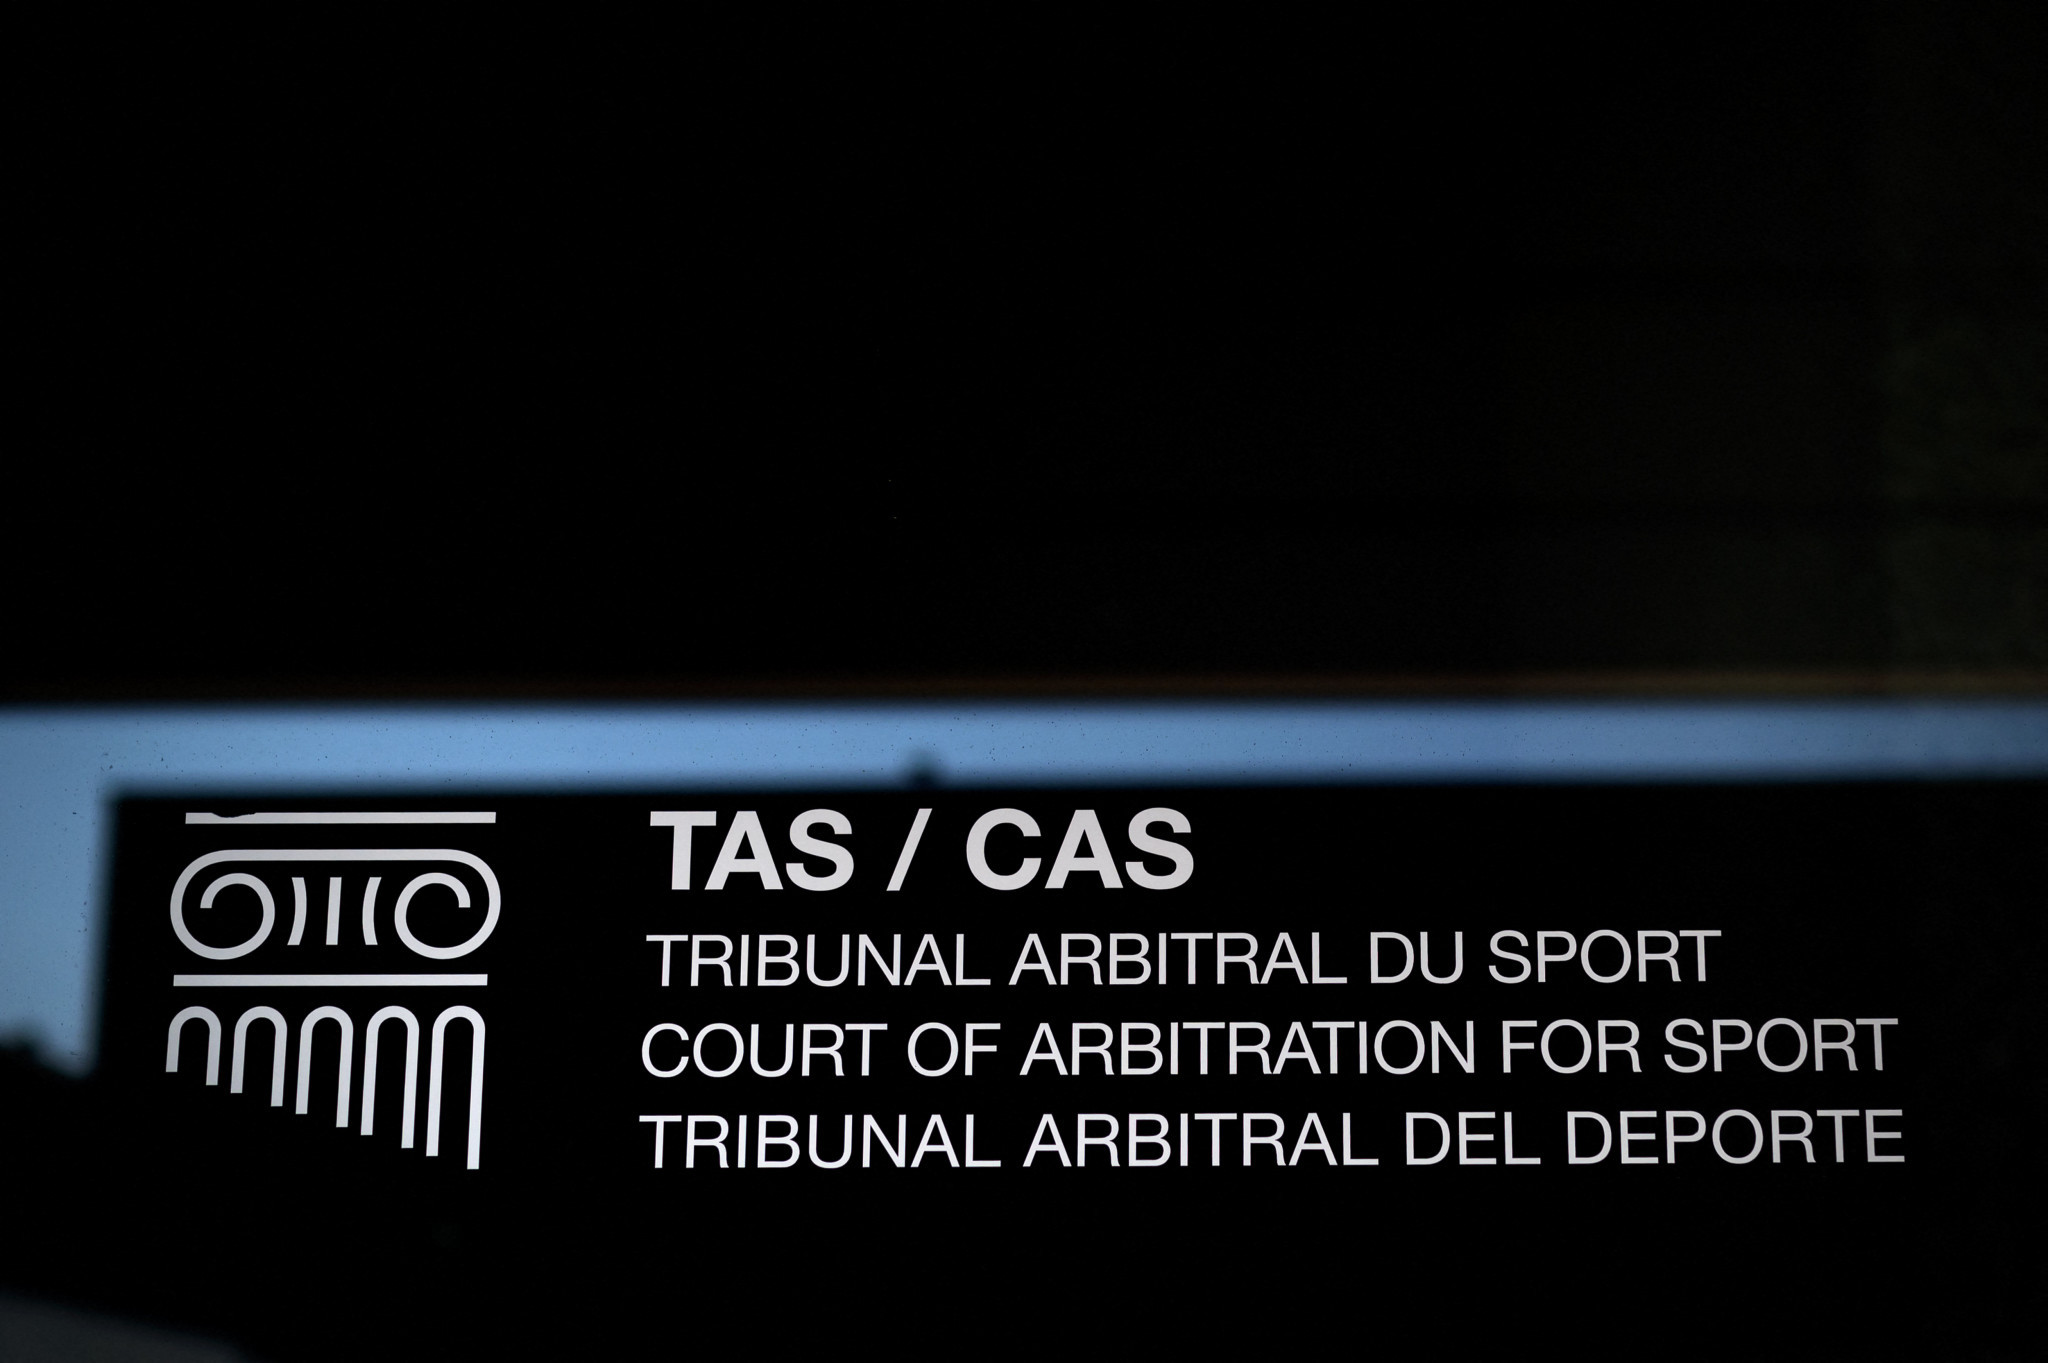 New CANOC President welcomes plan to set up regional office of Court of Arbitration for Sport in Caribbean